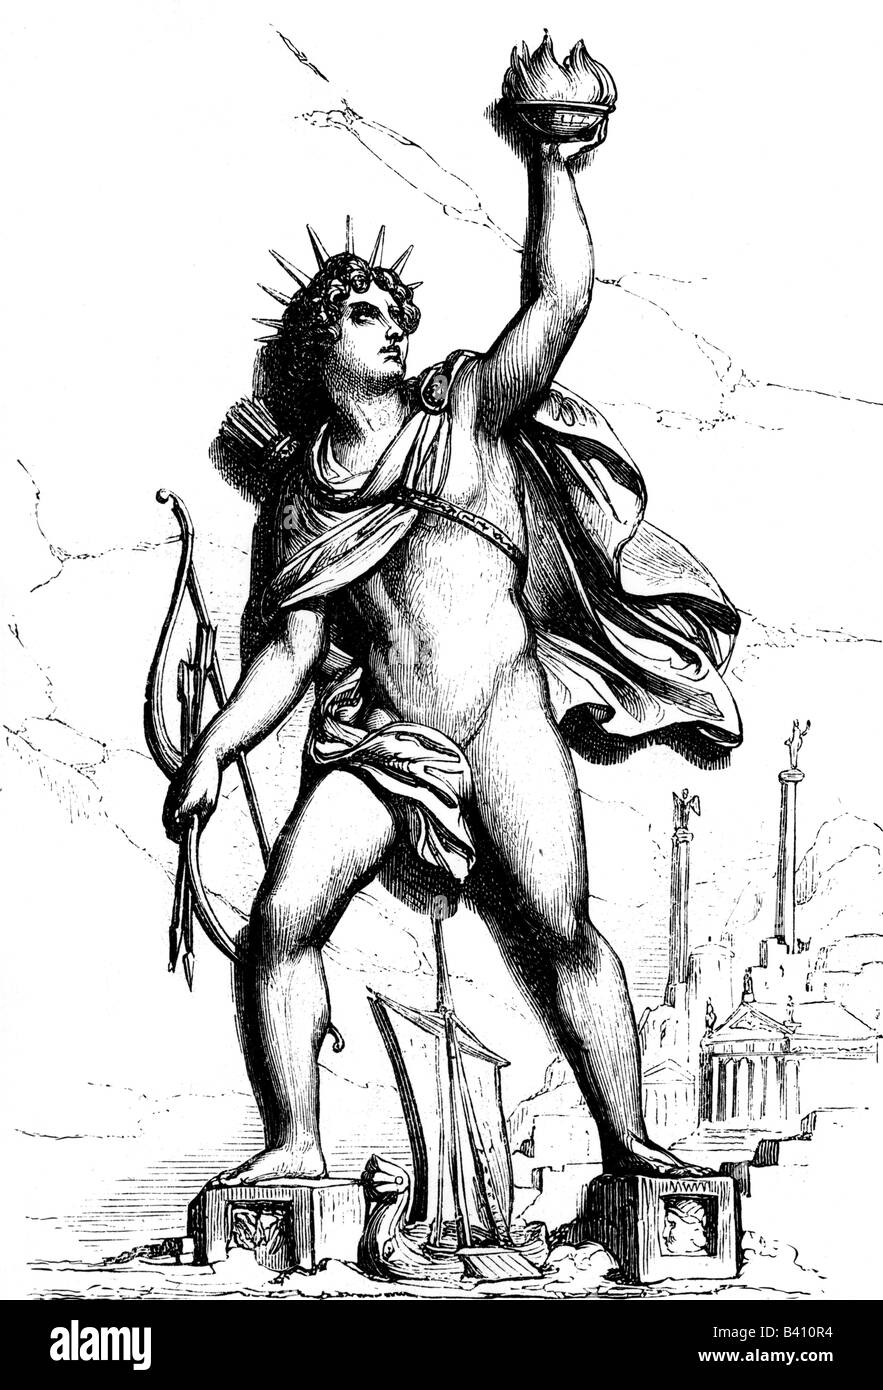 ancient world, wonder of the world, Colossus of Rhodes, statue of Helios, reconstruction, engraving, 19th century, graphic, graphics, giant, sun-god, sun god, mythology, Greece, Greek, historical, historic, one of the Seven Wonder of the World, ancient world, people, Stock Photo